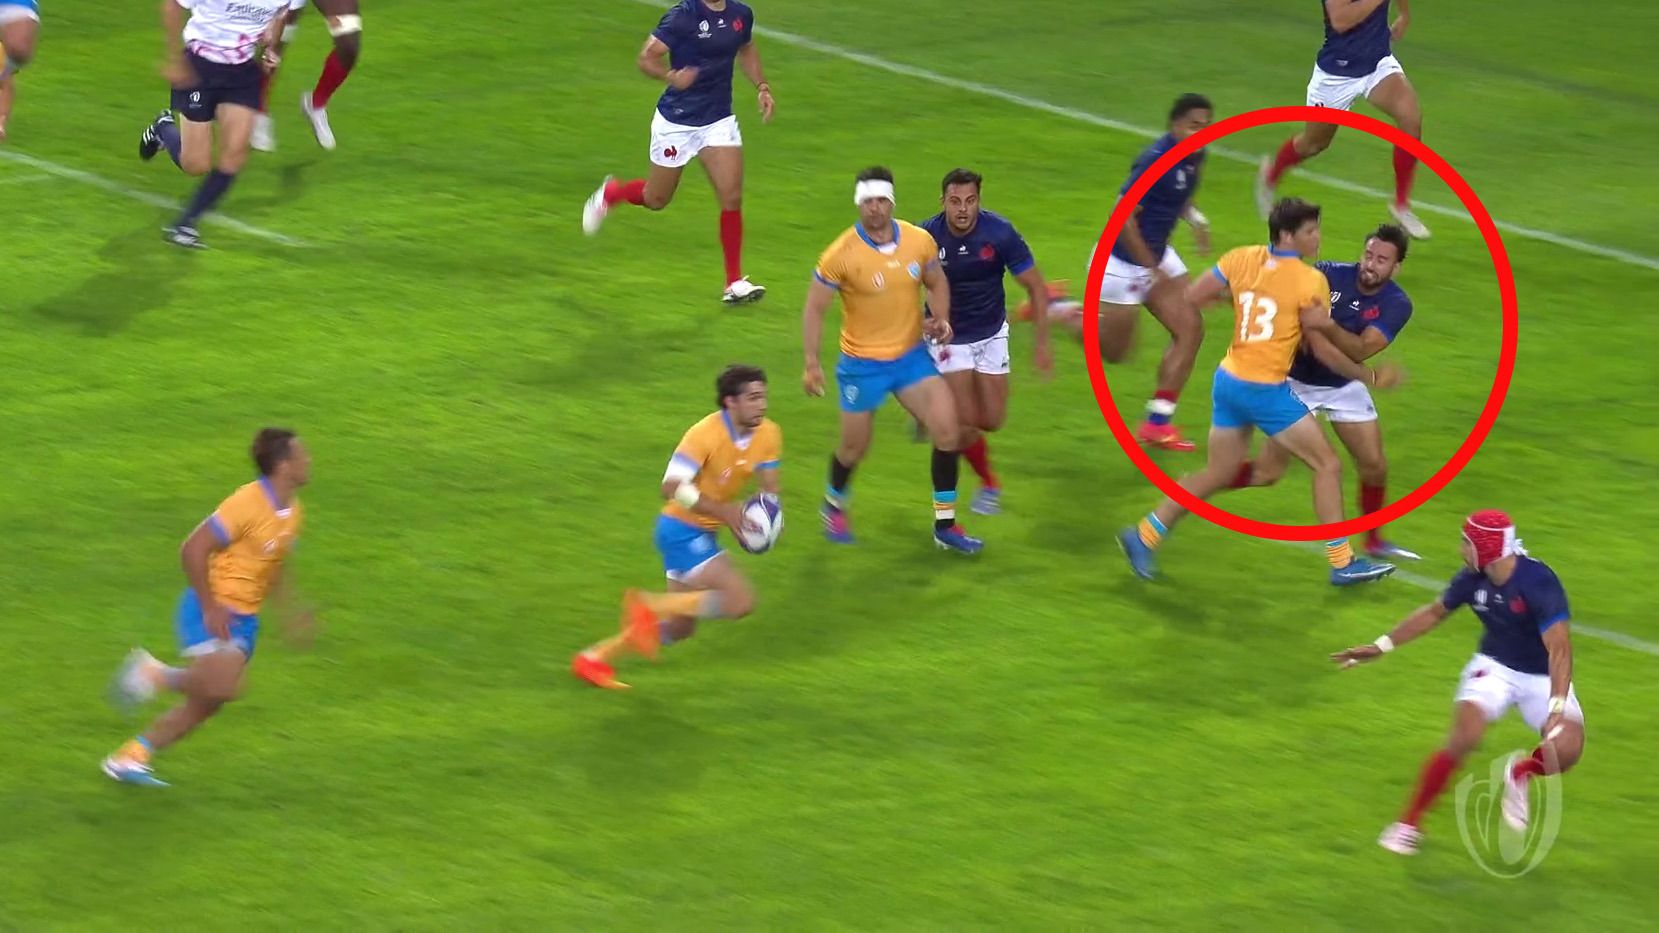 The moment Uruguay&#x27;s Tomas Inciarte impeded Antoine Hastoy that starved Felipe Etcheverry of a try.